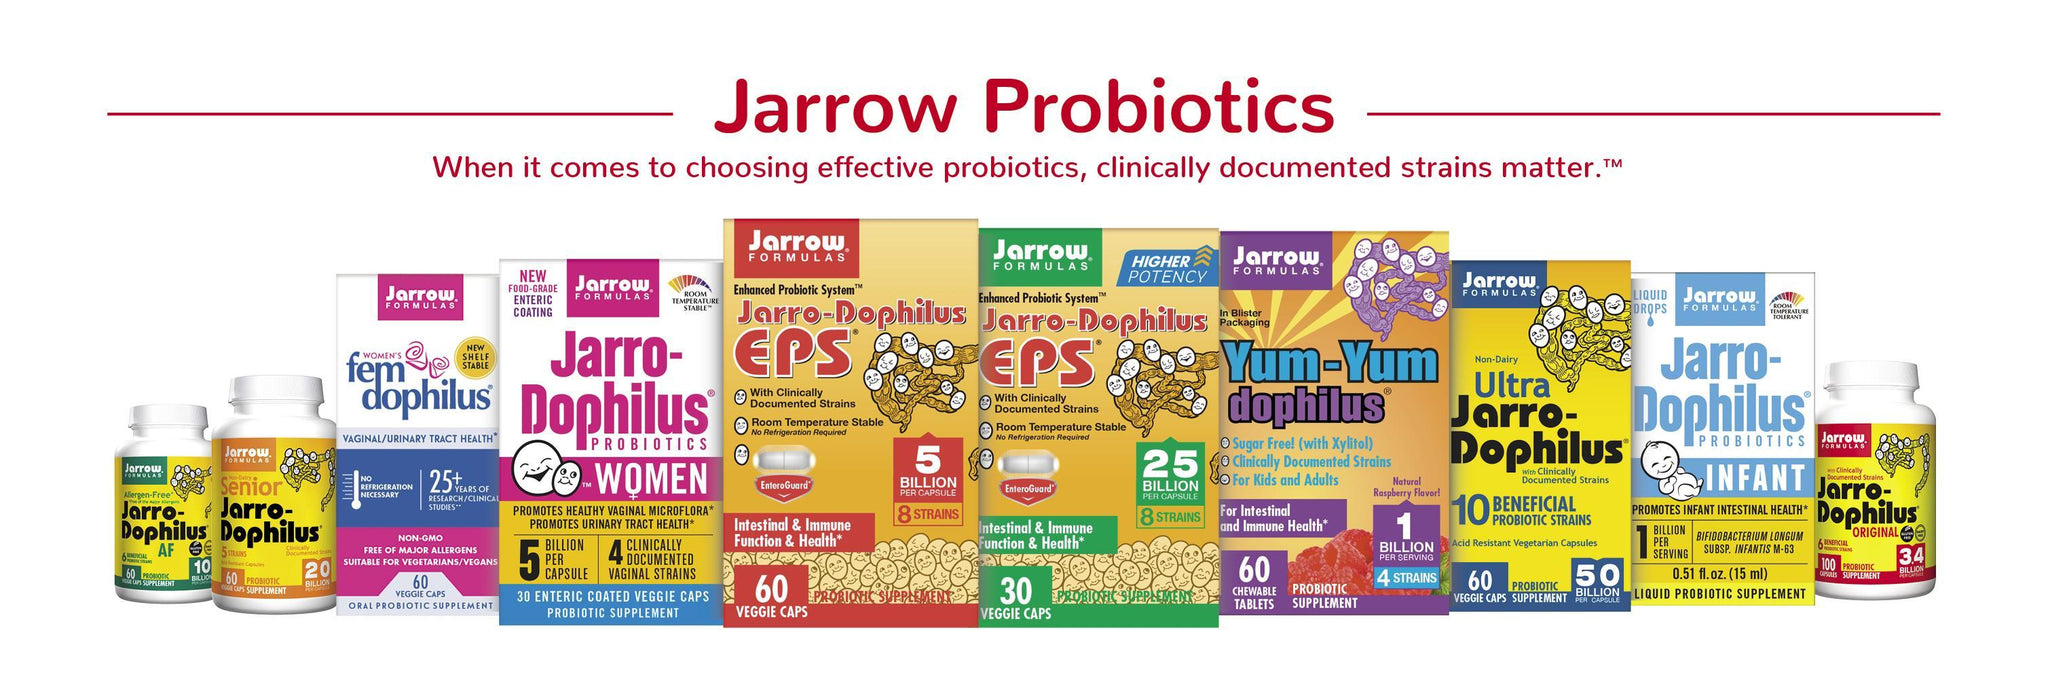 Jarrow Probiotics - When it comes to choosing effective probiotics, clinically documented strains matter.